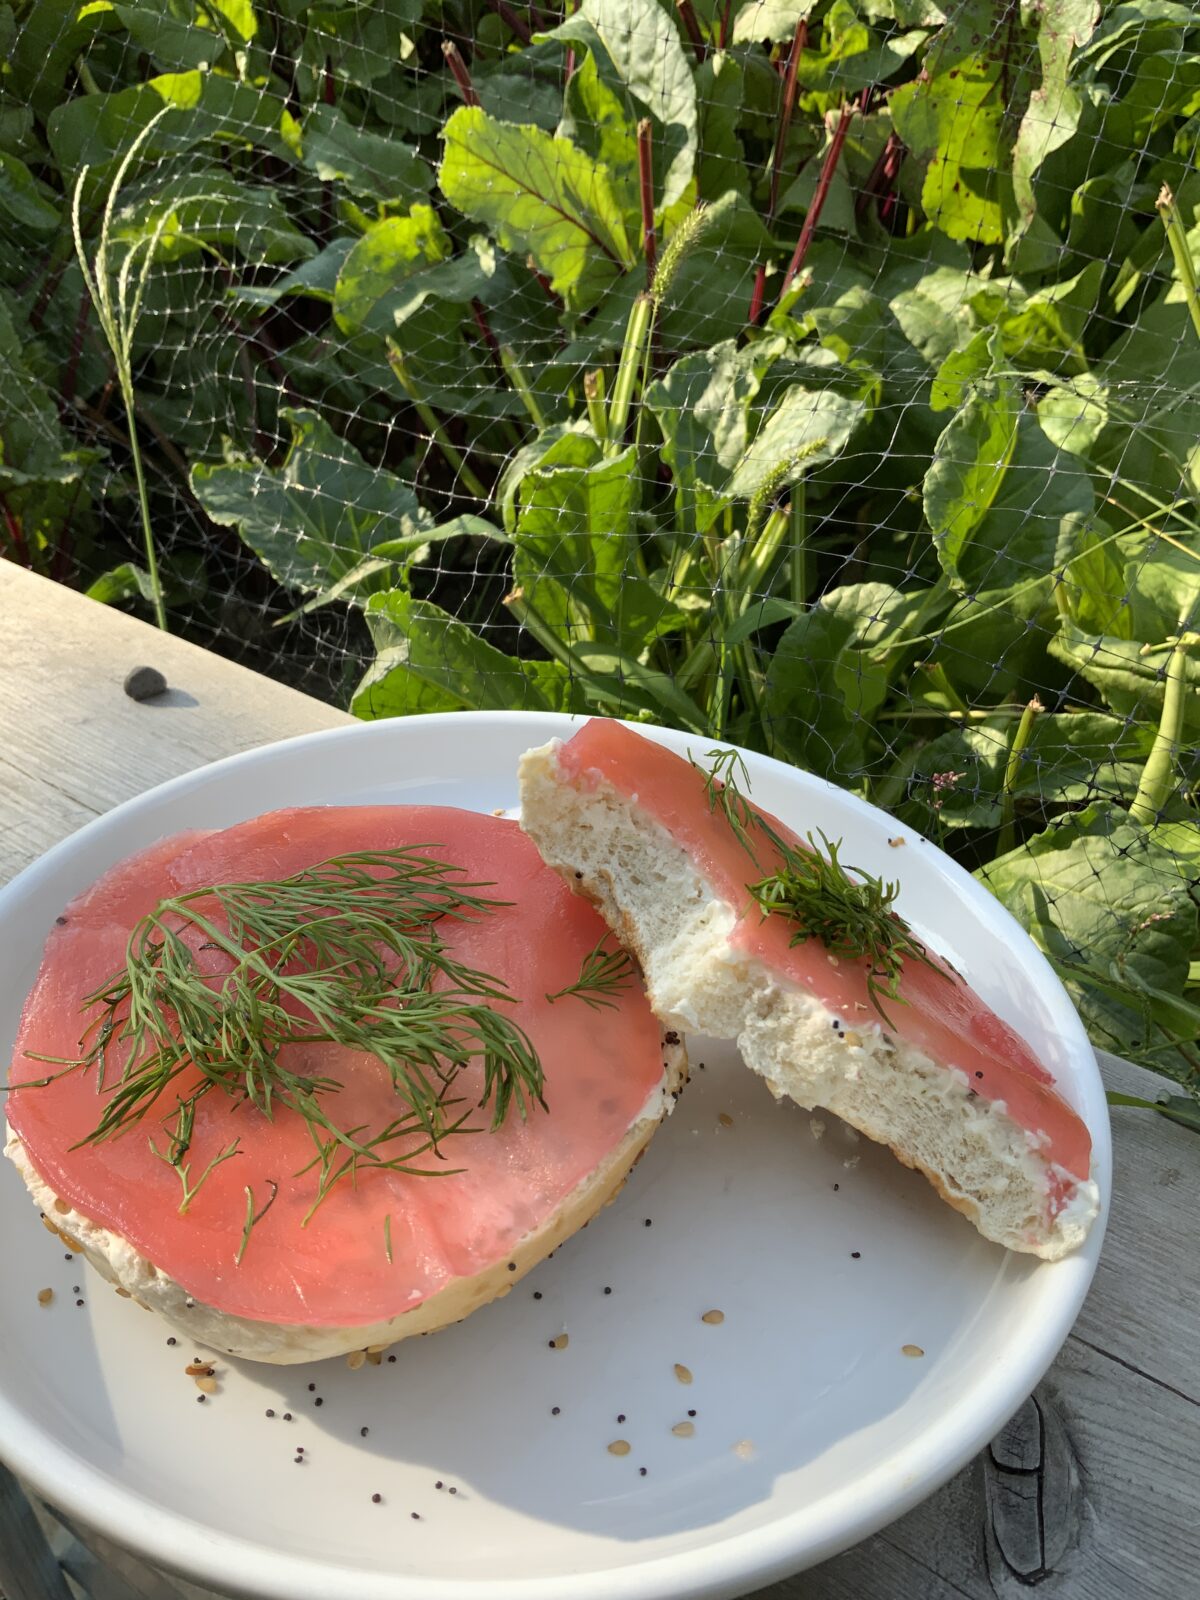 Vegan salmon made from beets on a cream-cheese bagel, garnished with dill, in front of a garden.